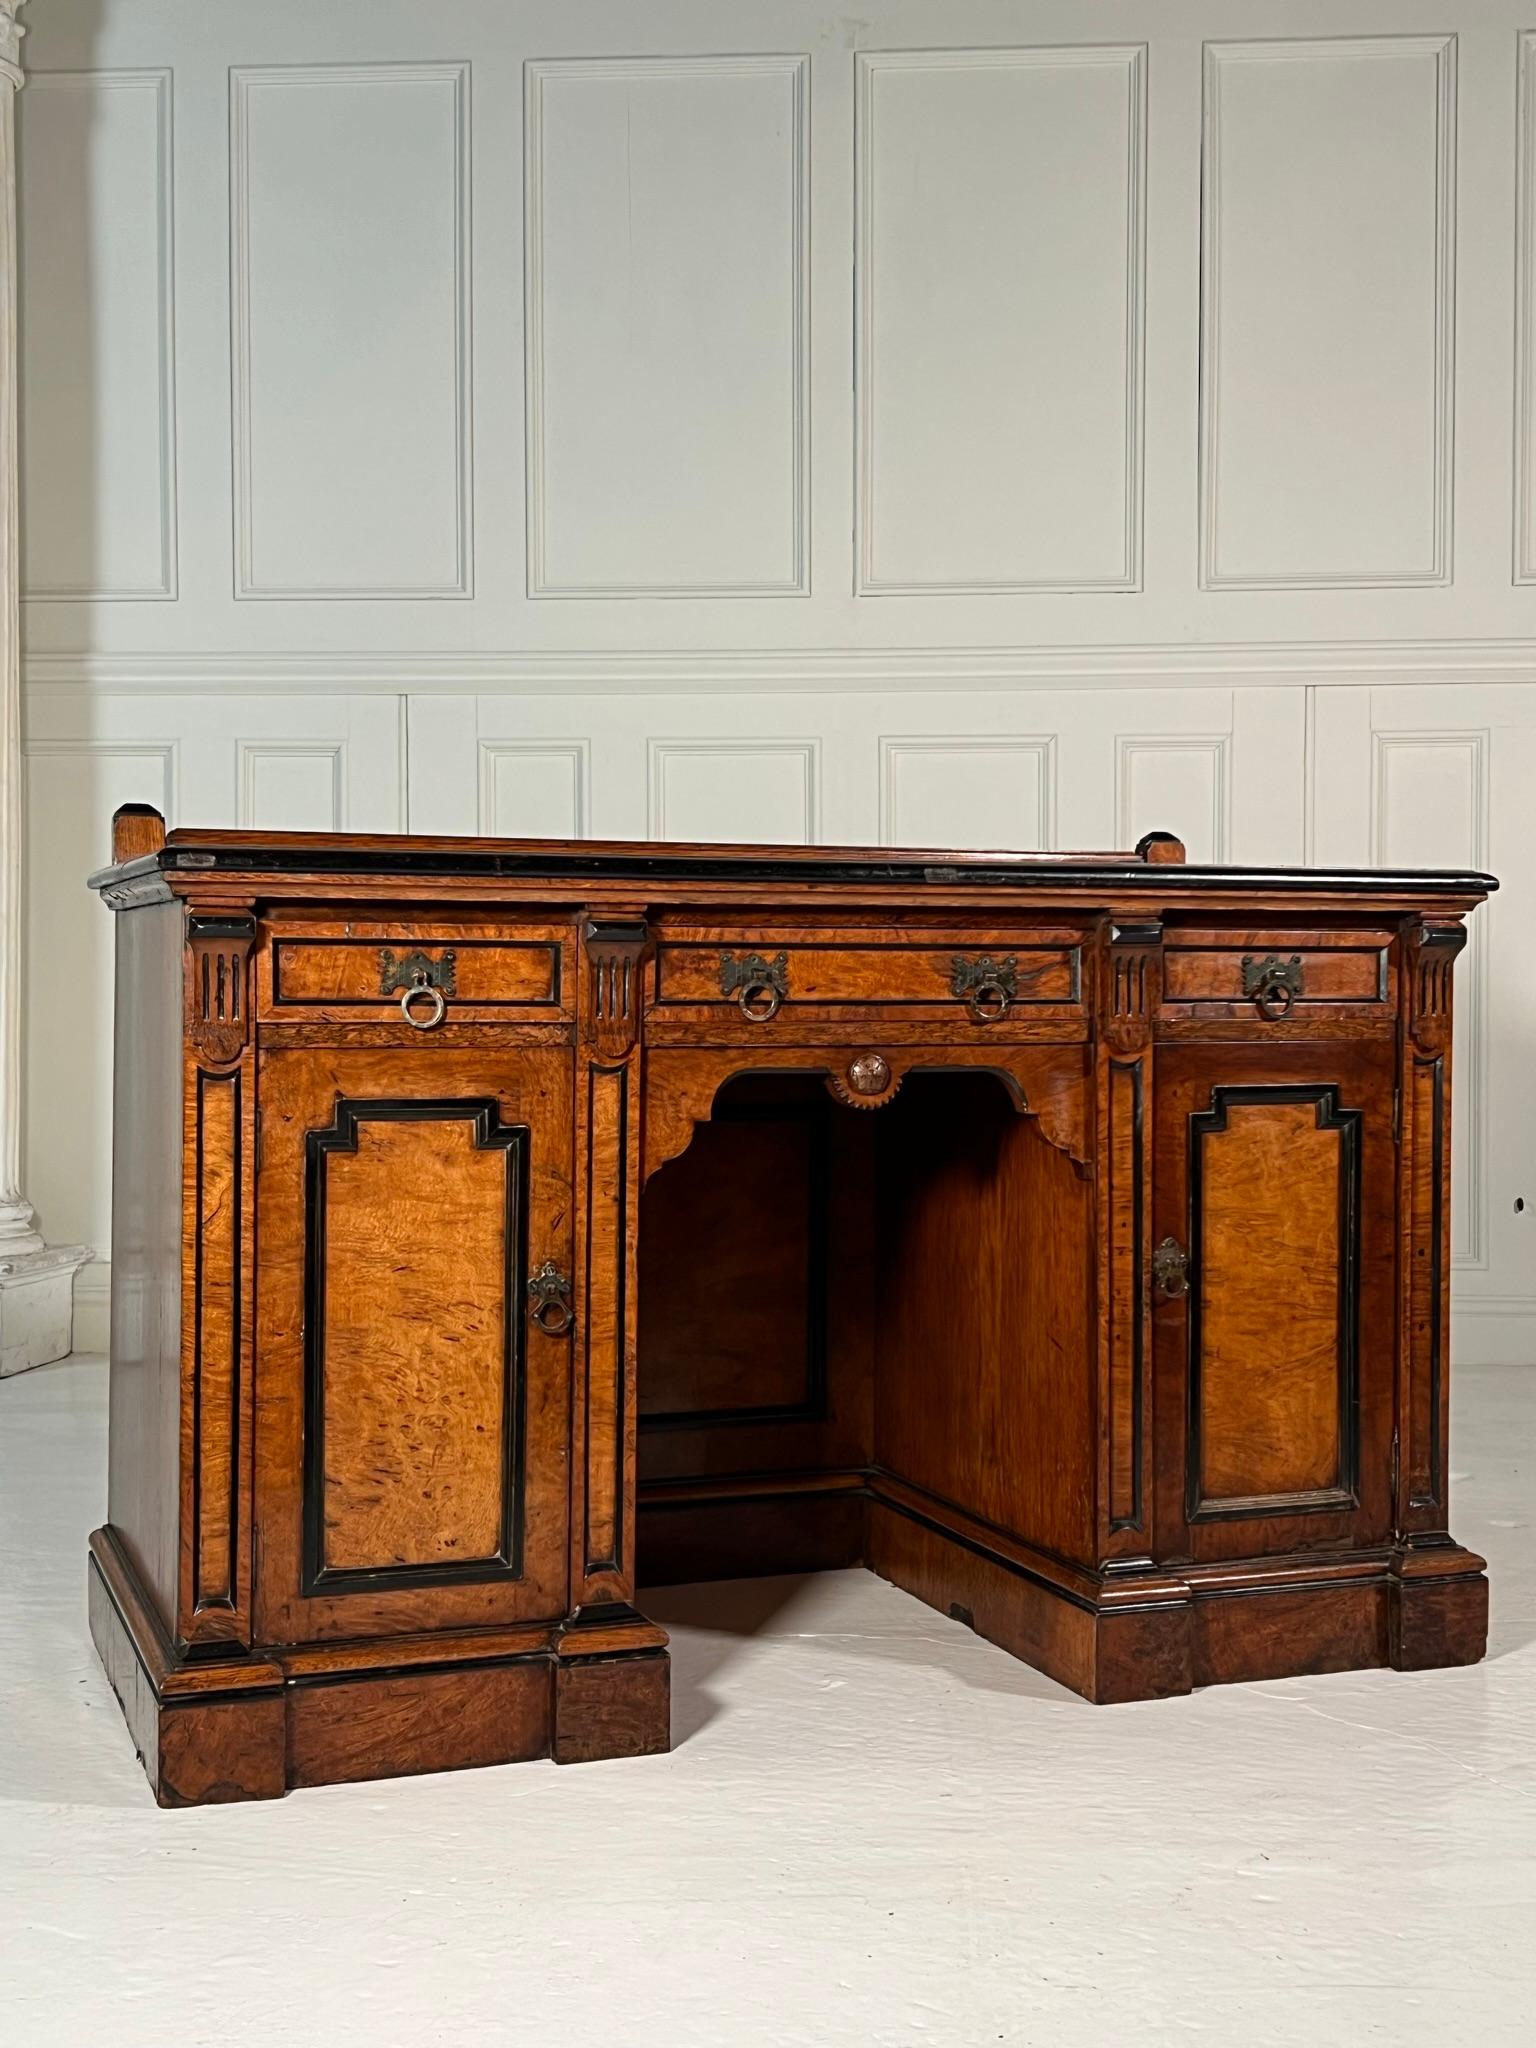 Exceptional quality desk produced during the Aesthetic movement.

Oak plank top with upstand, three drawers over two cupboards with burr veneer and satinwood inlay and ebonised detailing.

Age related wear and a repair to one handle as